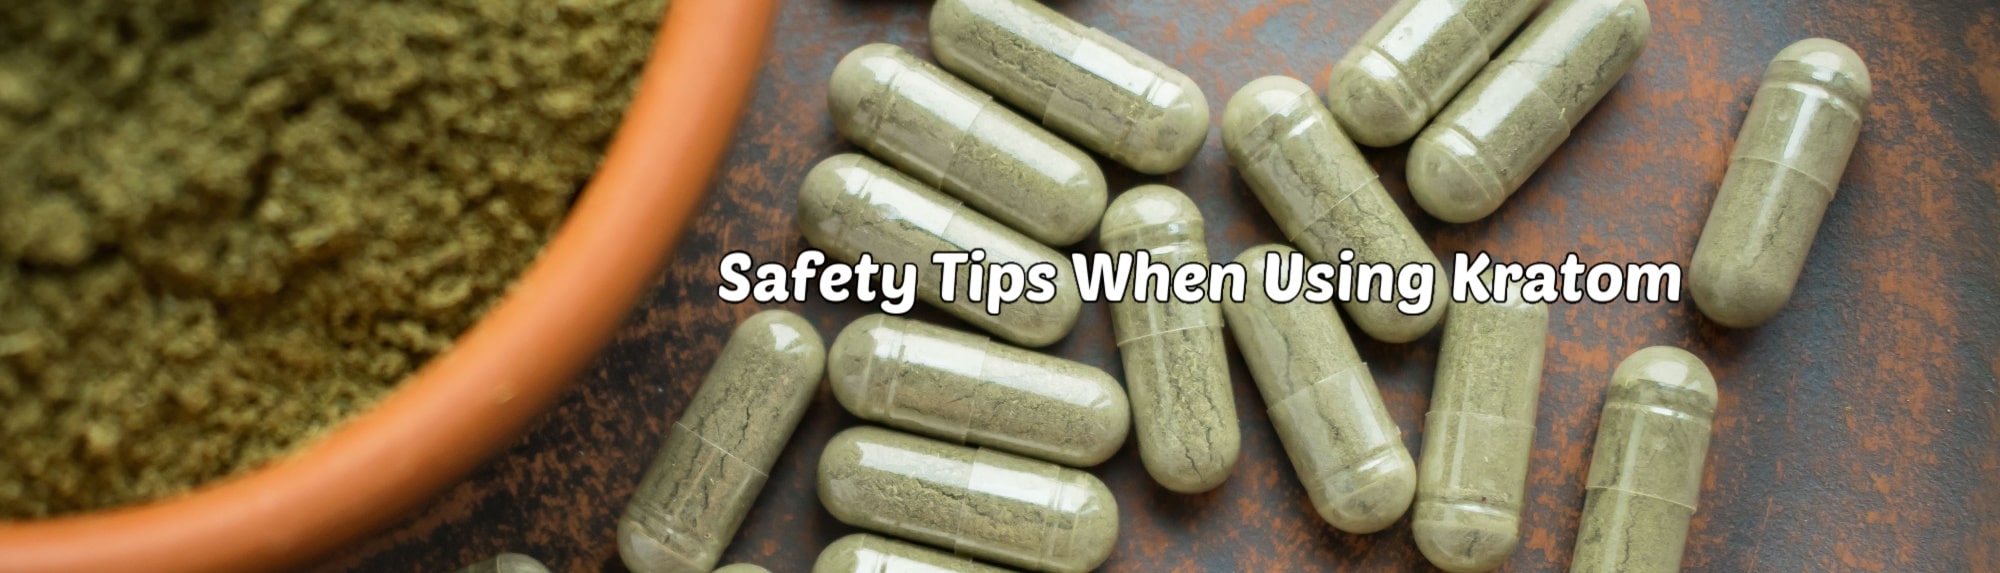 image of safety tips when using kratom